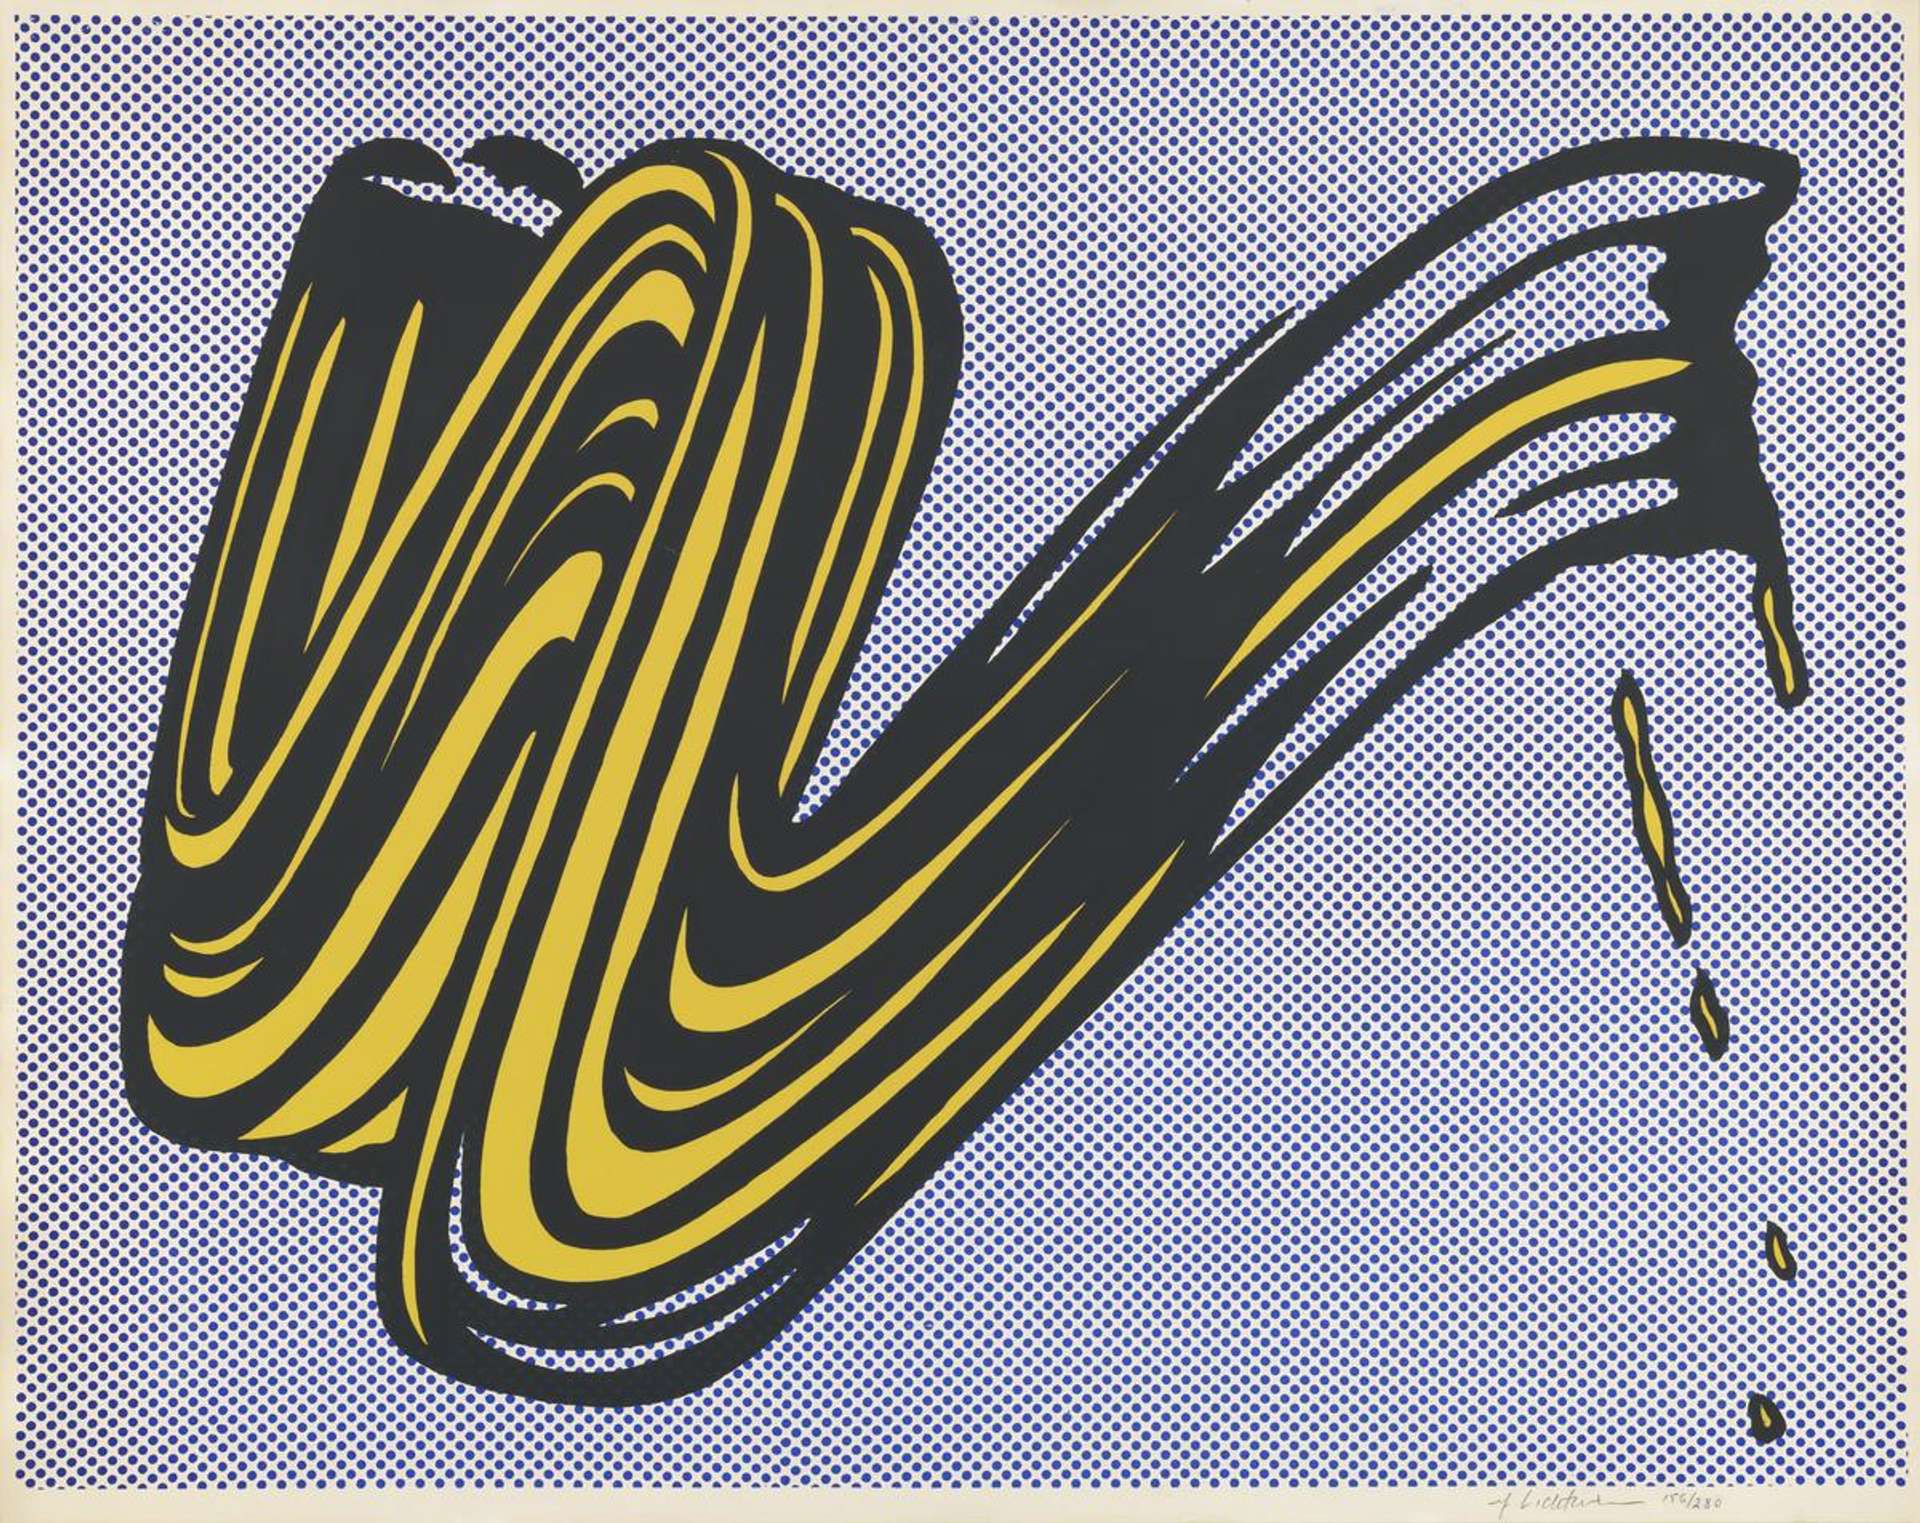 An image of the print Brushstroke by Roy Lichtenstein. It shows a cartoon-like yellow brushstroke, against a background of blue Ben-Day dots.